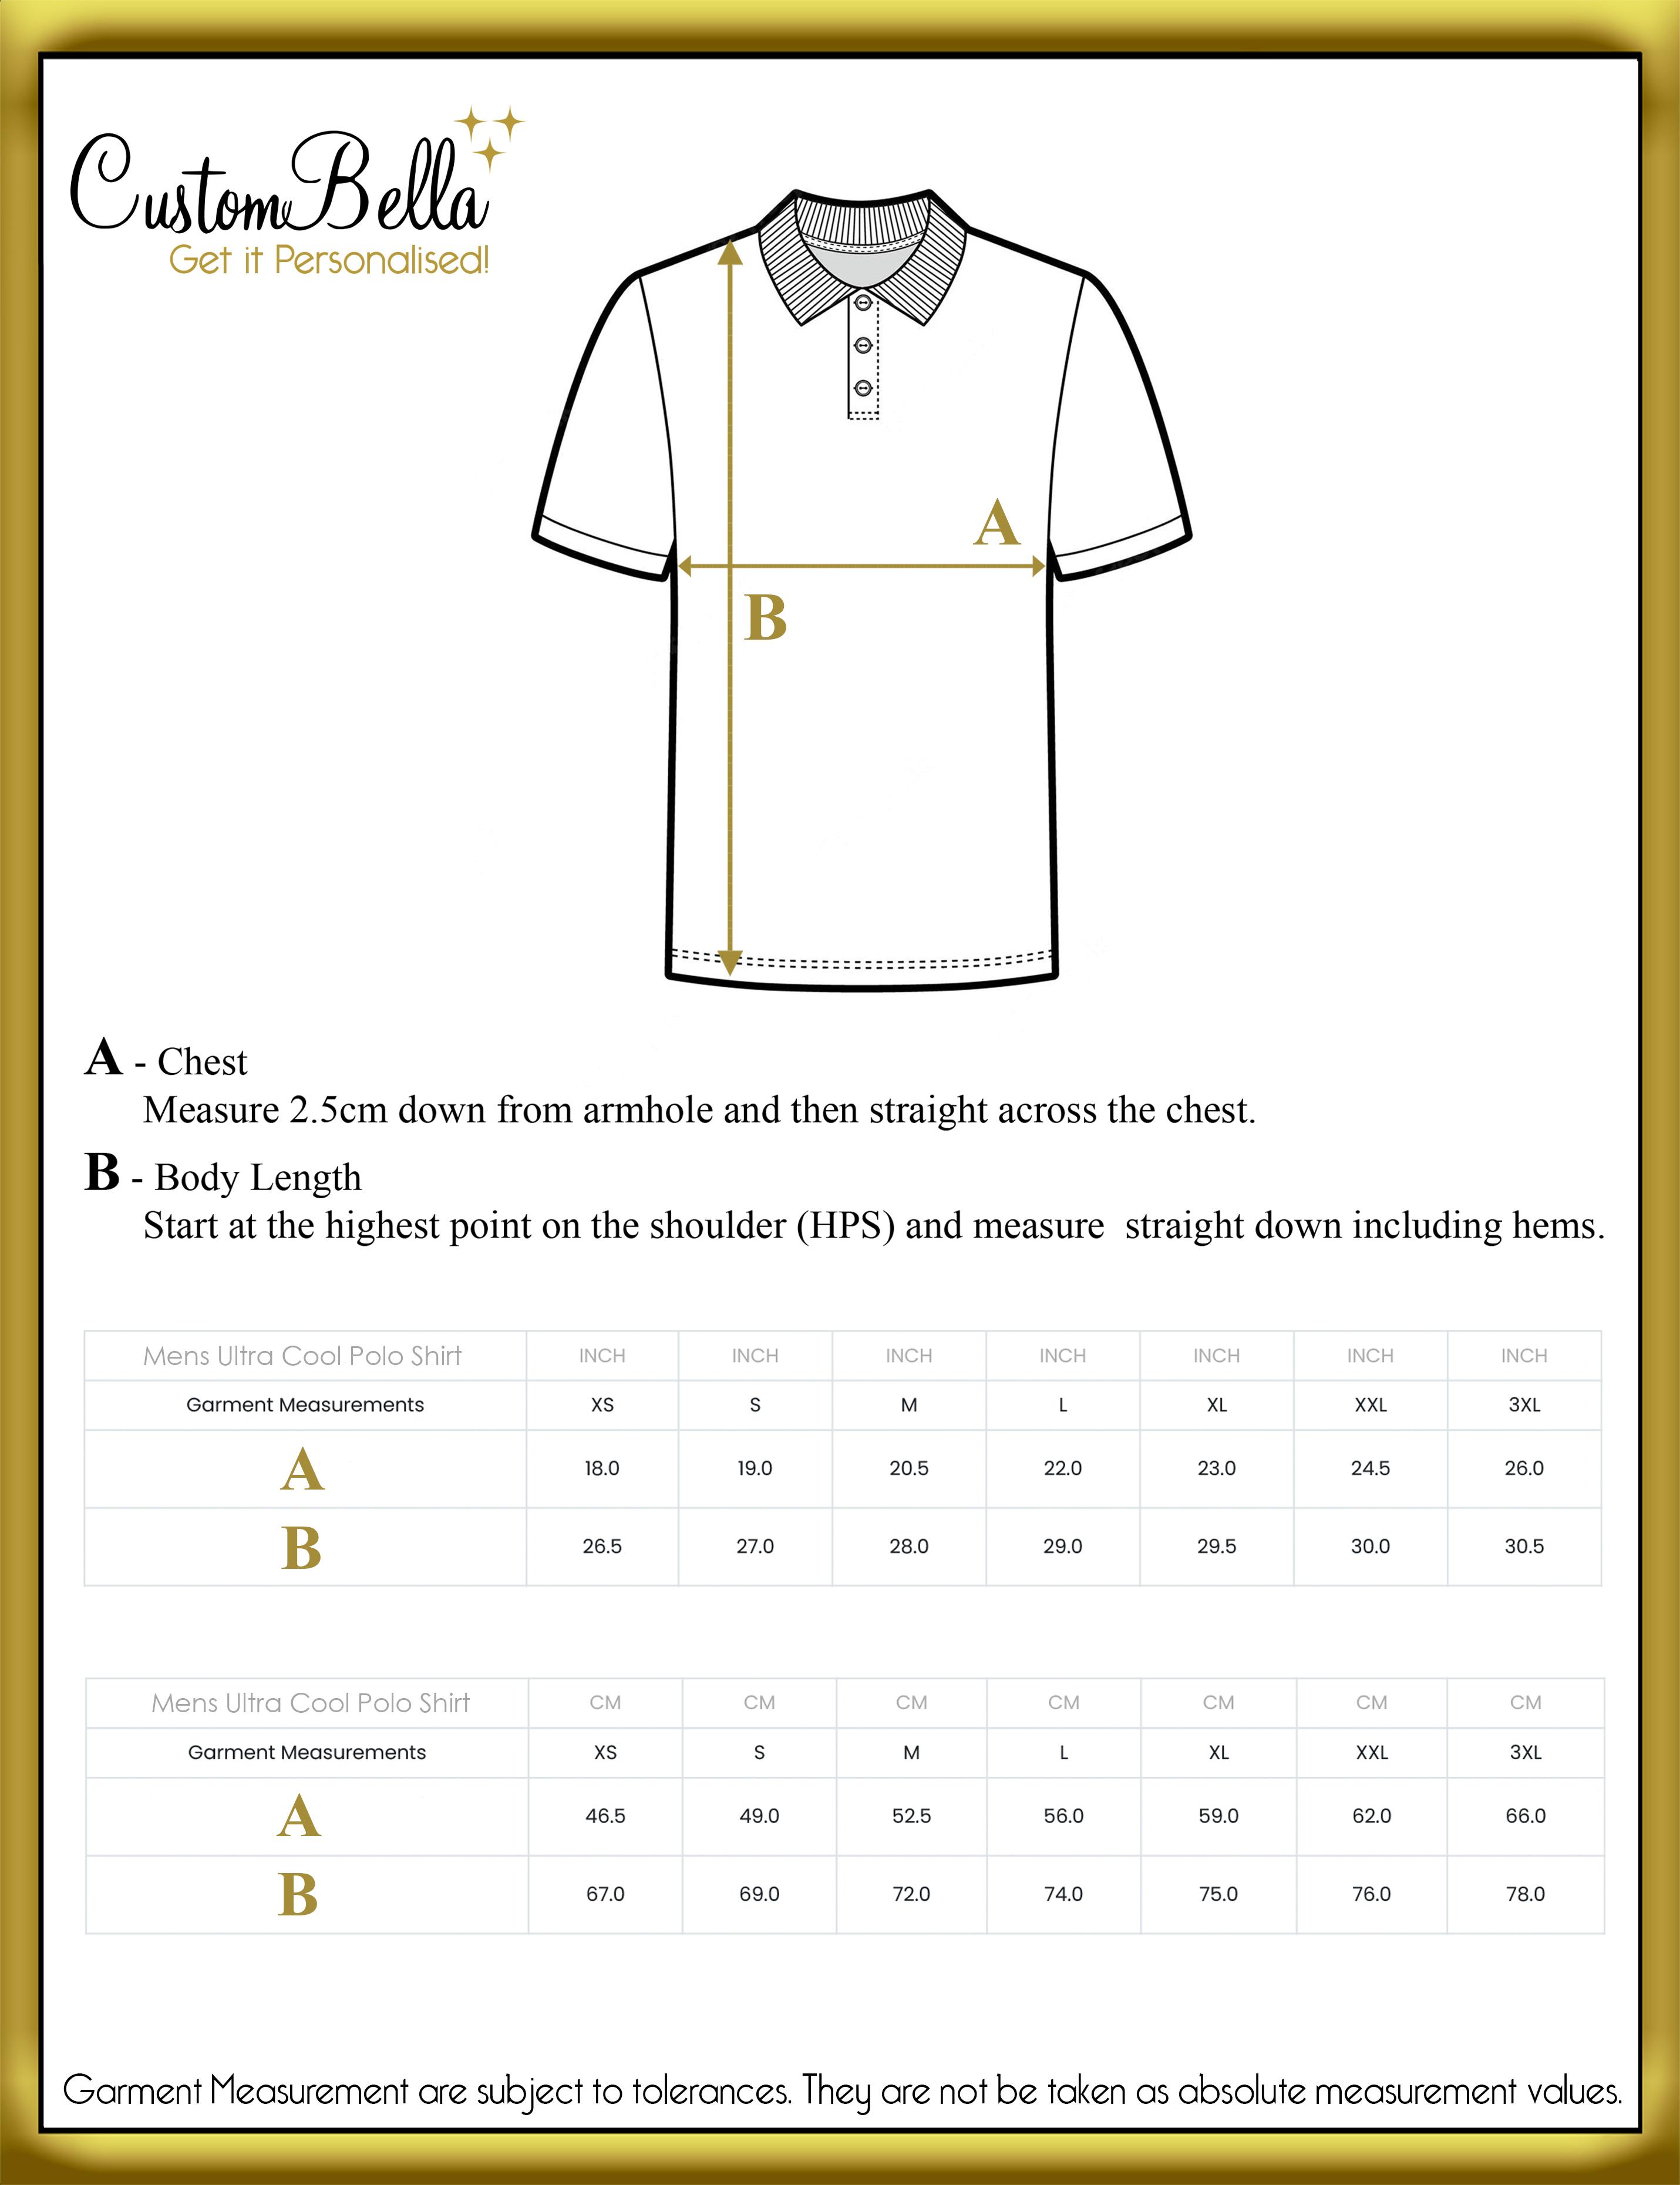 Embroidered Dri Fit Polo Shirt size chart